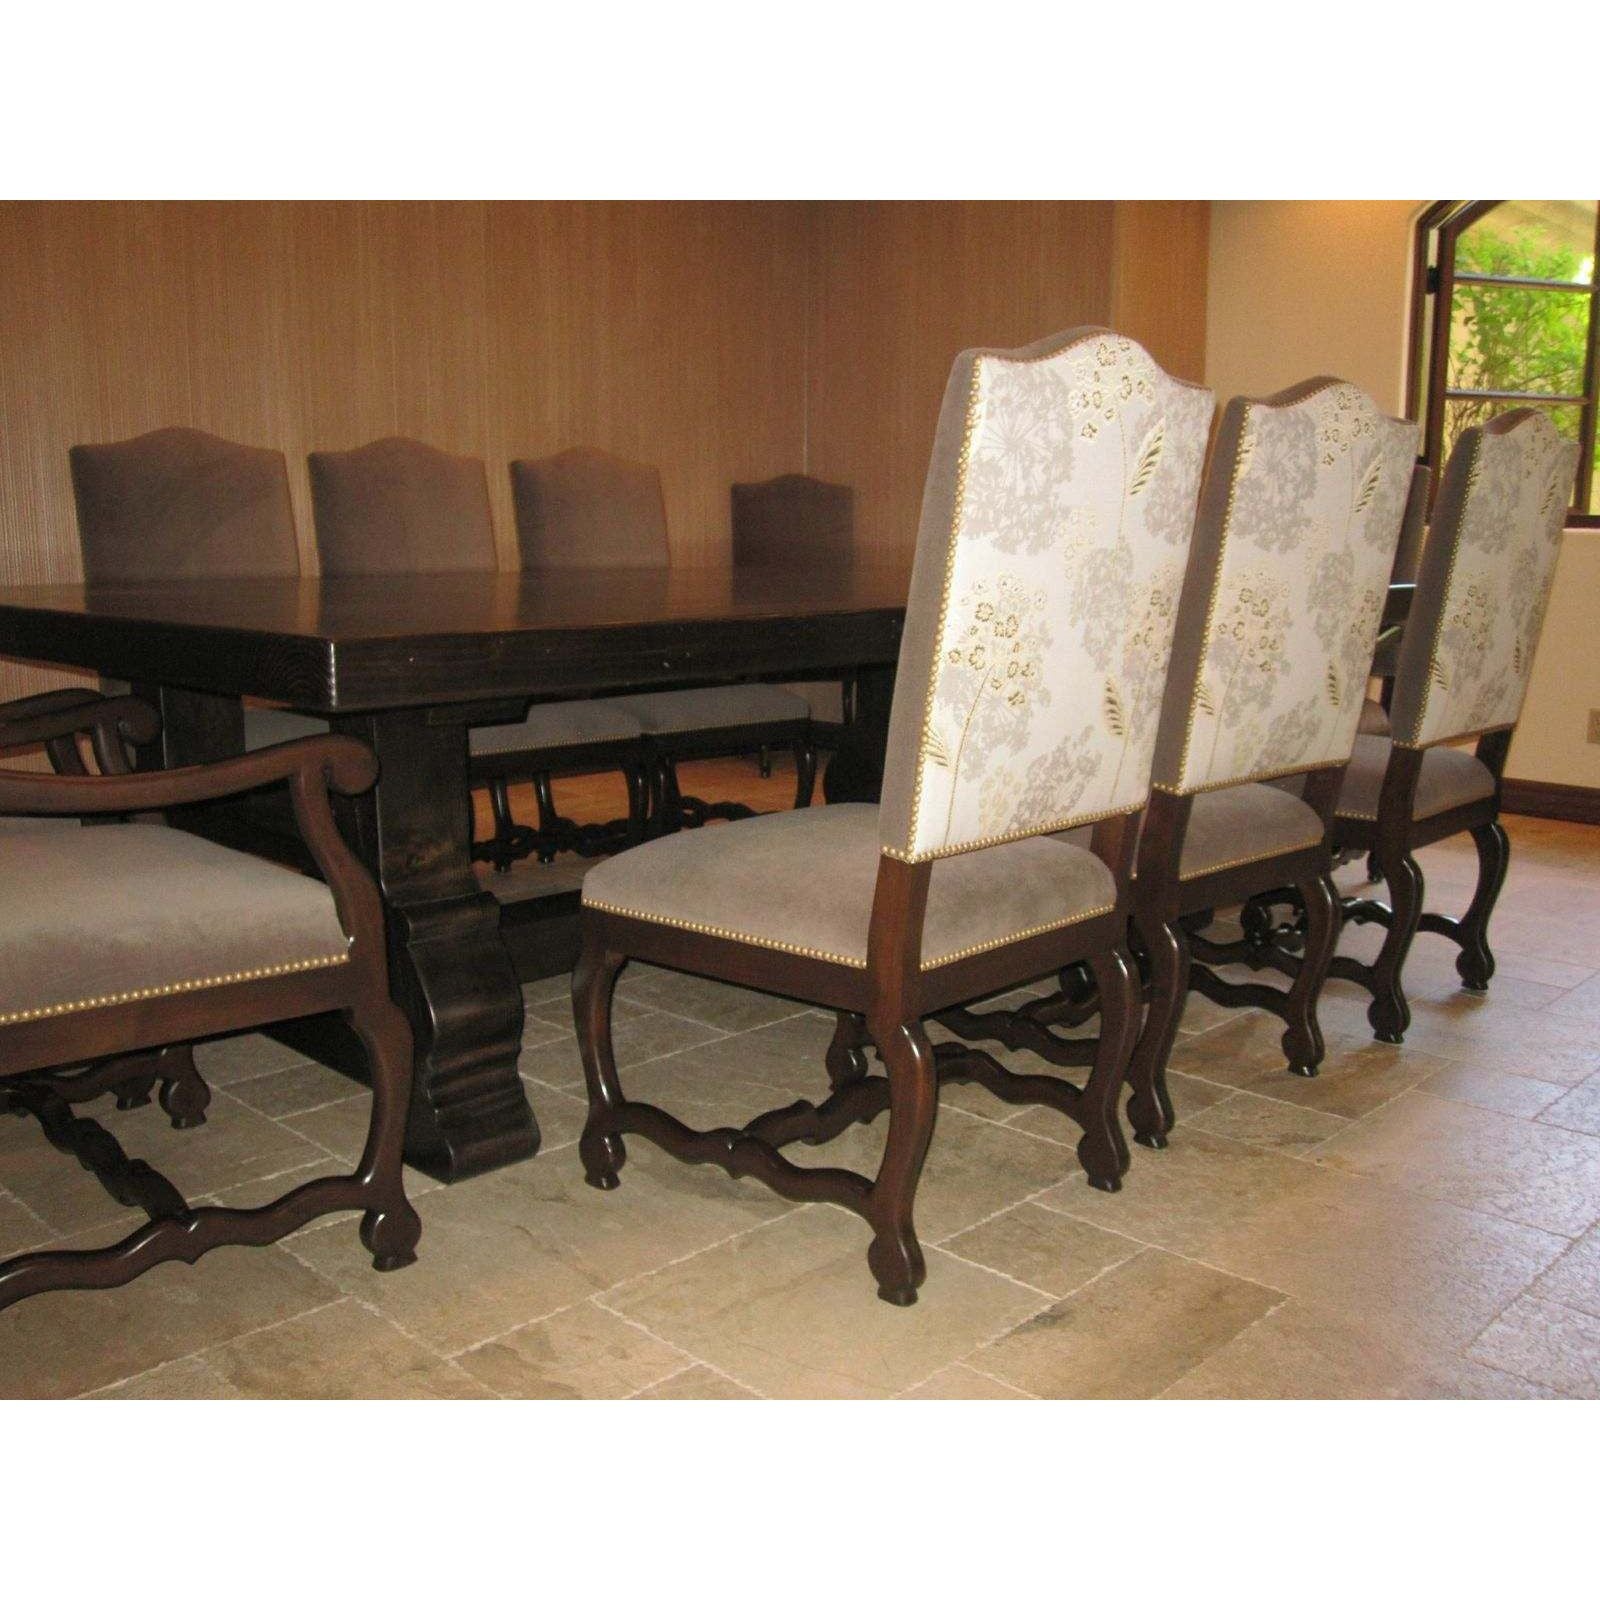 Custom Spanish Dining Table And Upholstered Chairs Mortise Tenon